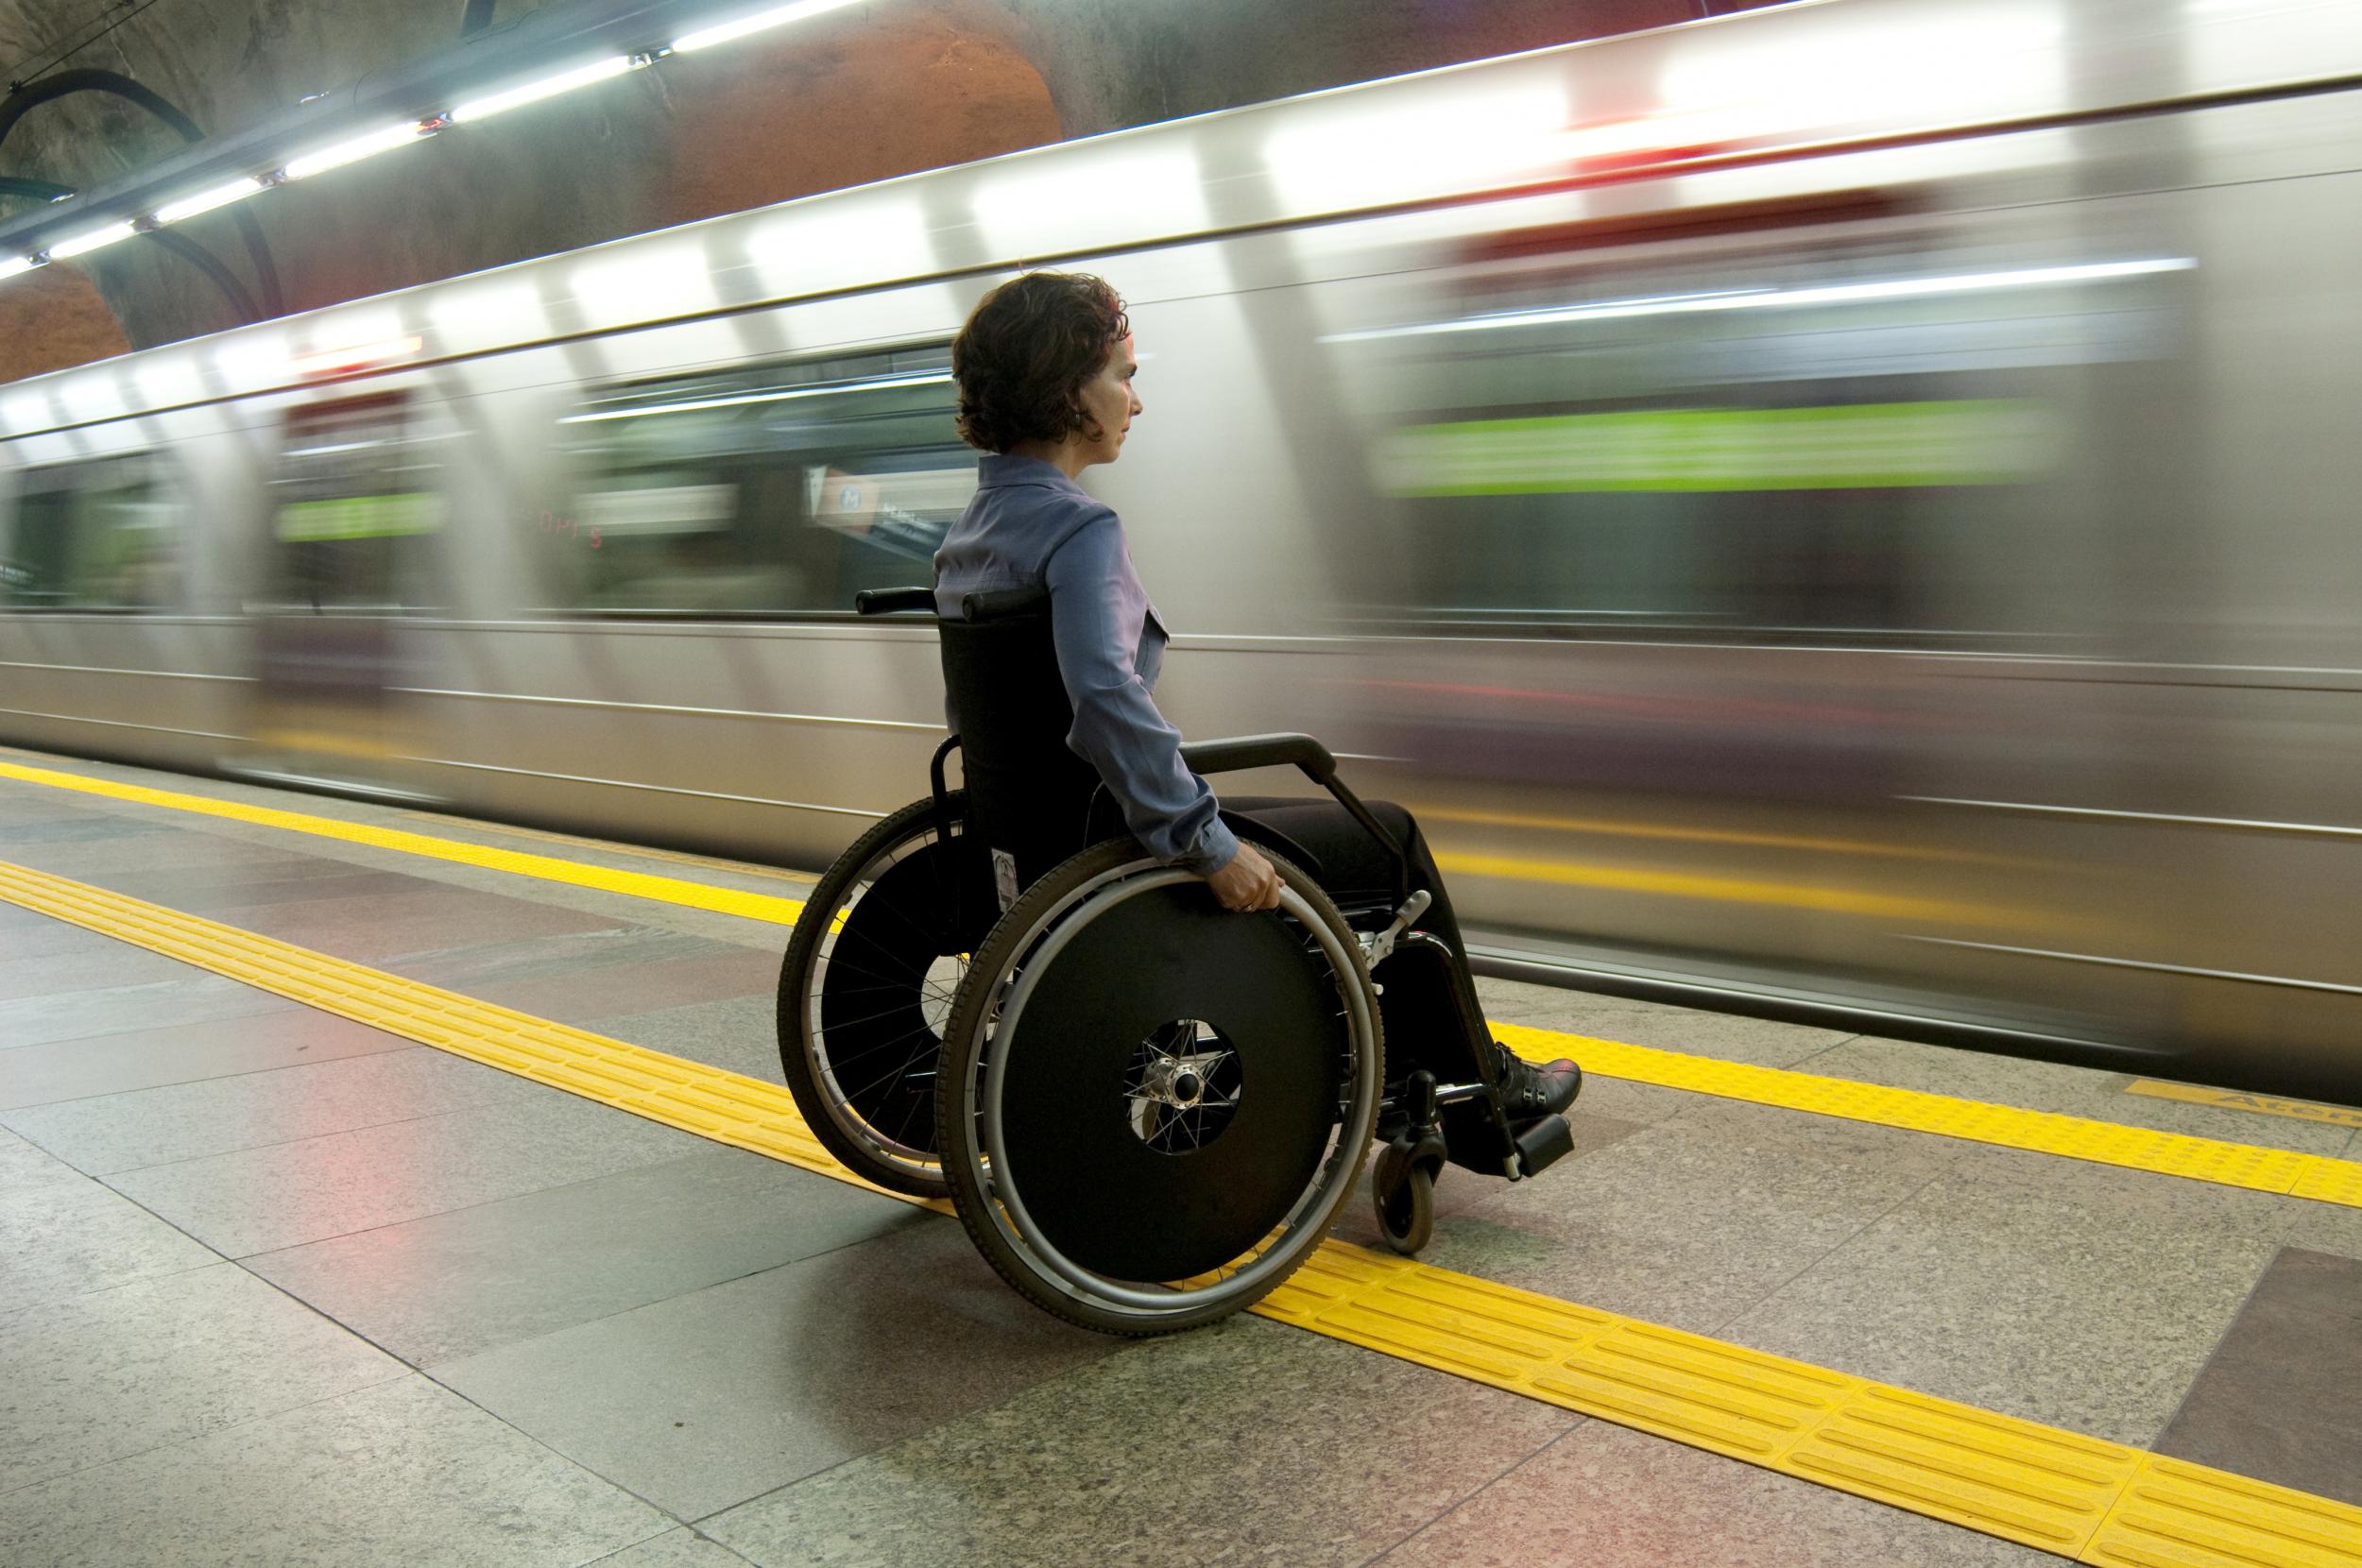 Train companies are letting down disabled passengers, according to campaigners